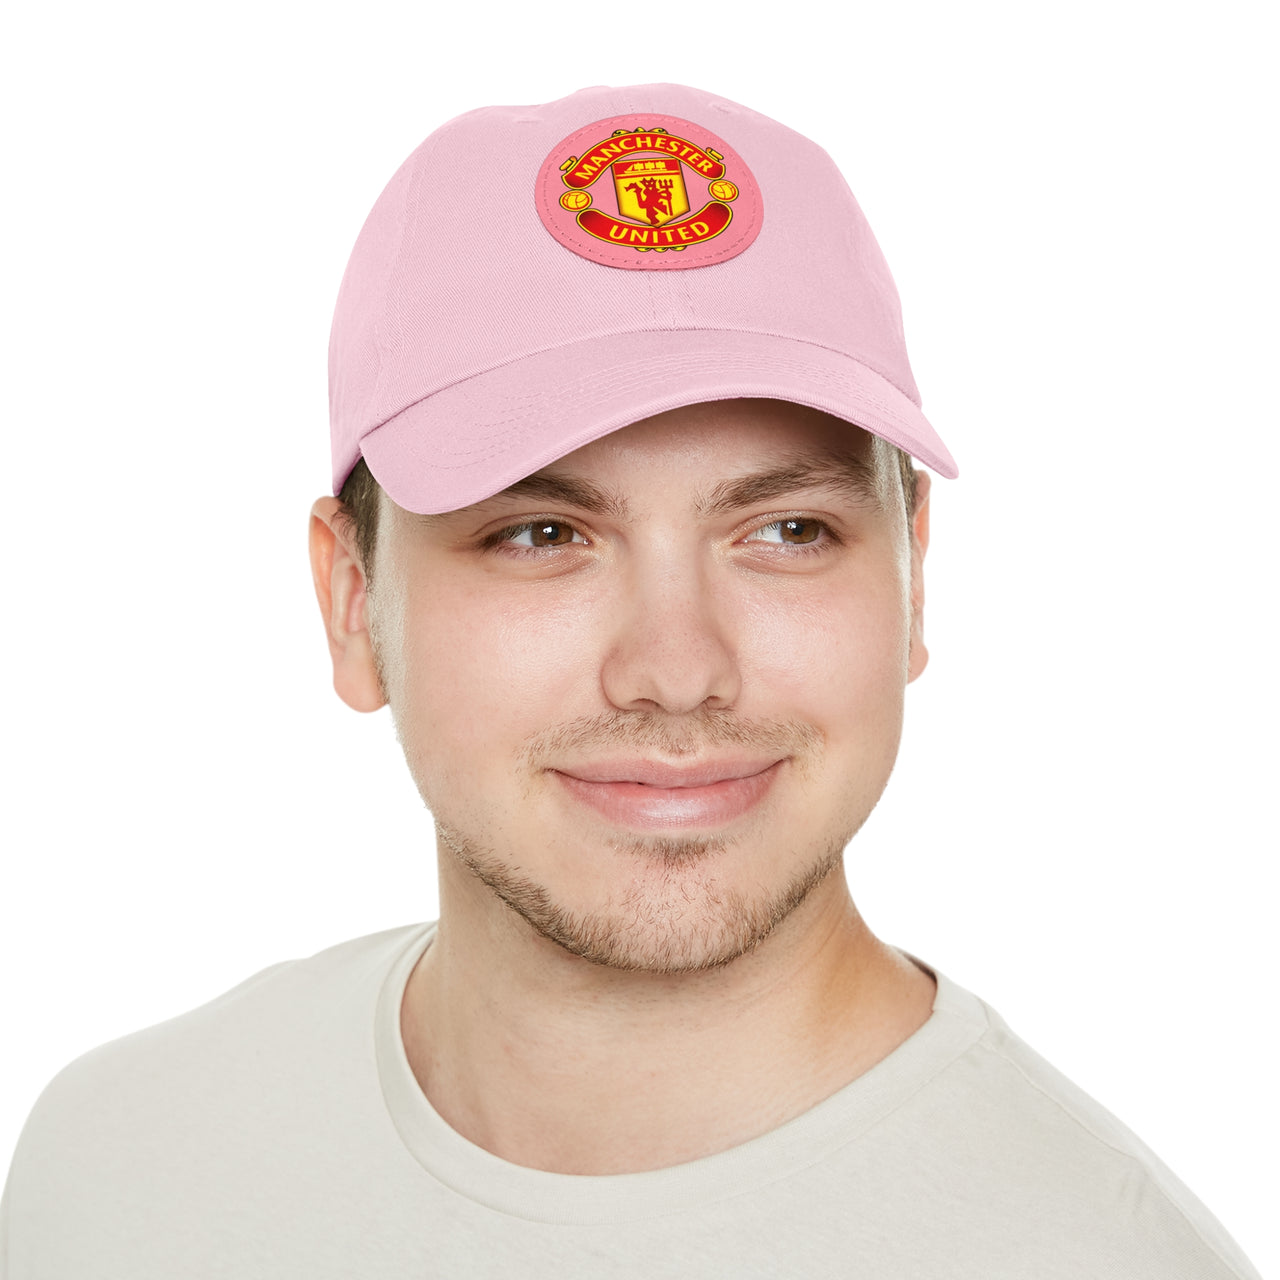 Manchester United Dad Hat with Leather Patch (Round)